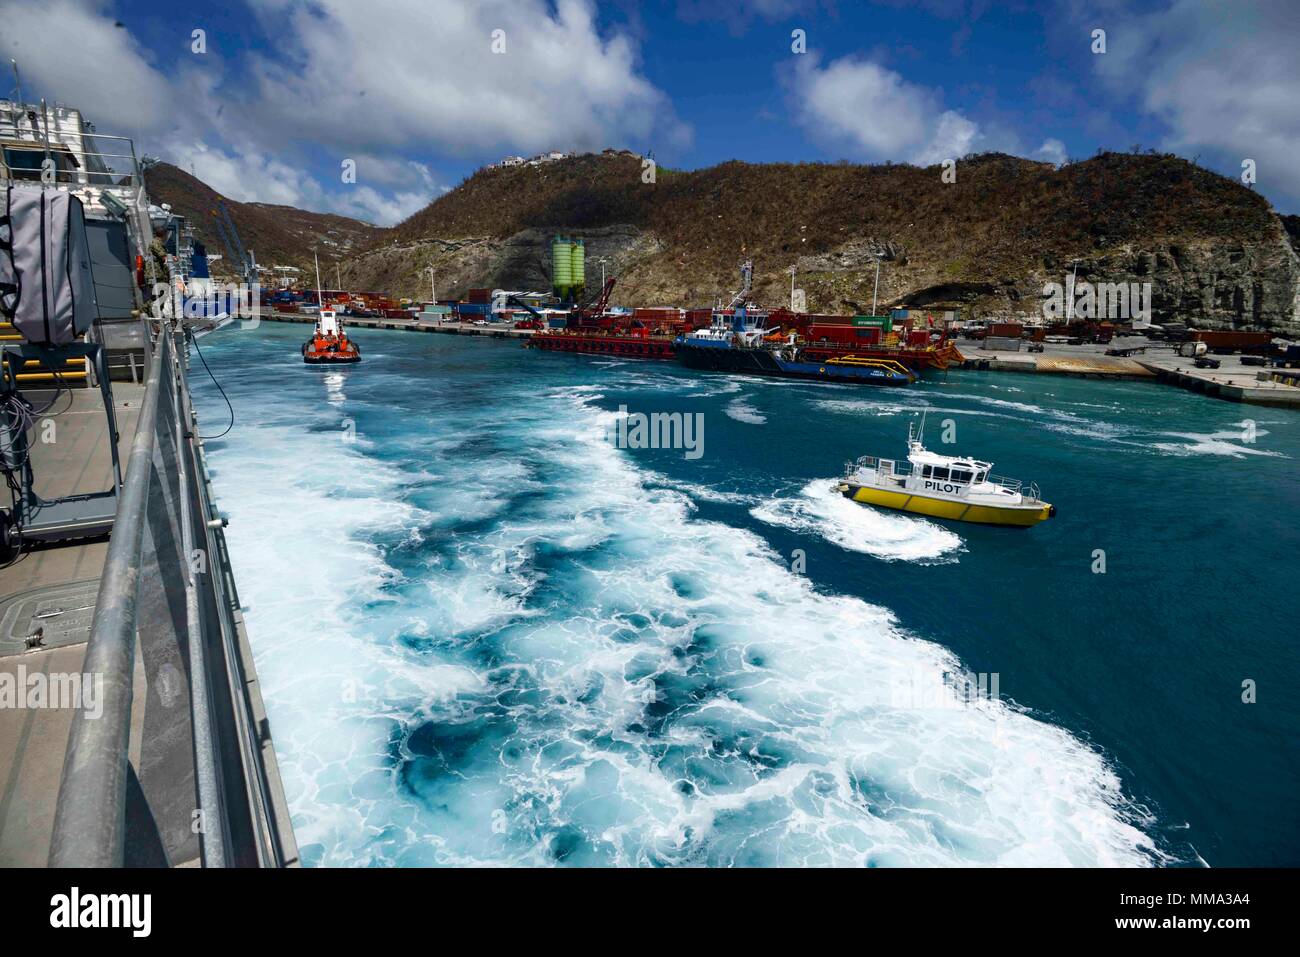 170917-N-KW679-0057 PHILIPSBURG, Sint Maarten (September 17, 2017) A pilot vessel and tugboat pull away from expeditionary fast transport vessel USNS Spearhead (T-EPF 1) as it departs the island of St. Martin. Spearhead assisted in humanitarian aid and disaster relief efforts for people affected by Hurricane Irma. SPS 17 is a U.S. Navy deployment executed by U.S. Naval Forces Southern Command/U.S. 4th Fleet, focused on subject matter expert exchanges with partner nation militaries and security forces in Central and South America. (U.S. Navy photo by Mass Communication Specialist 3rd Class Kris Stock Photo